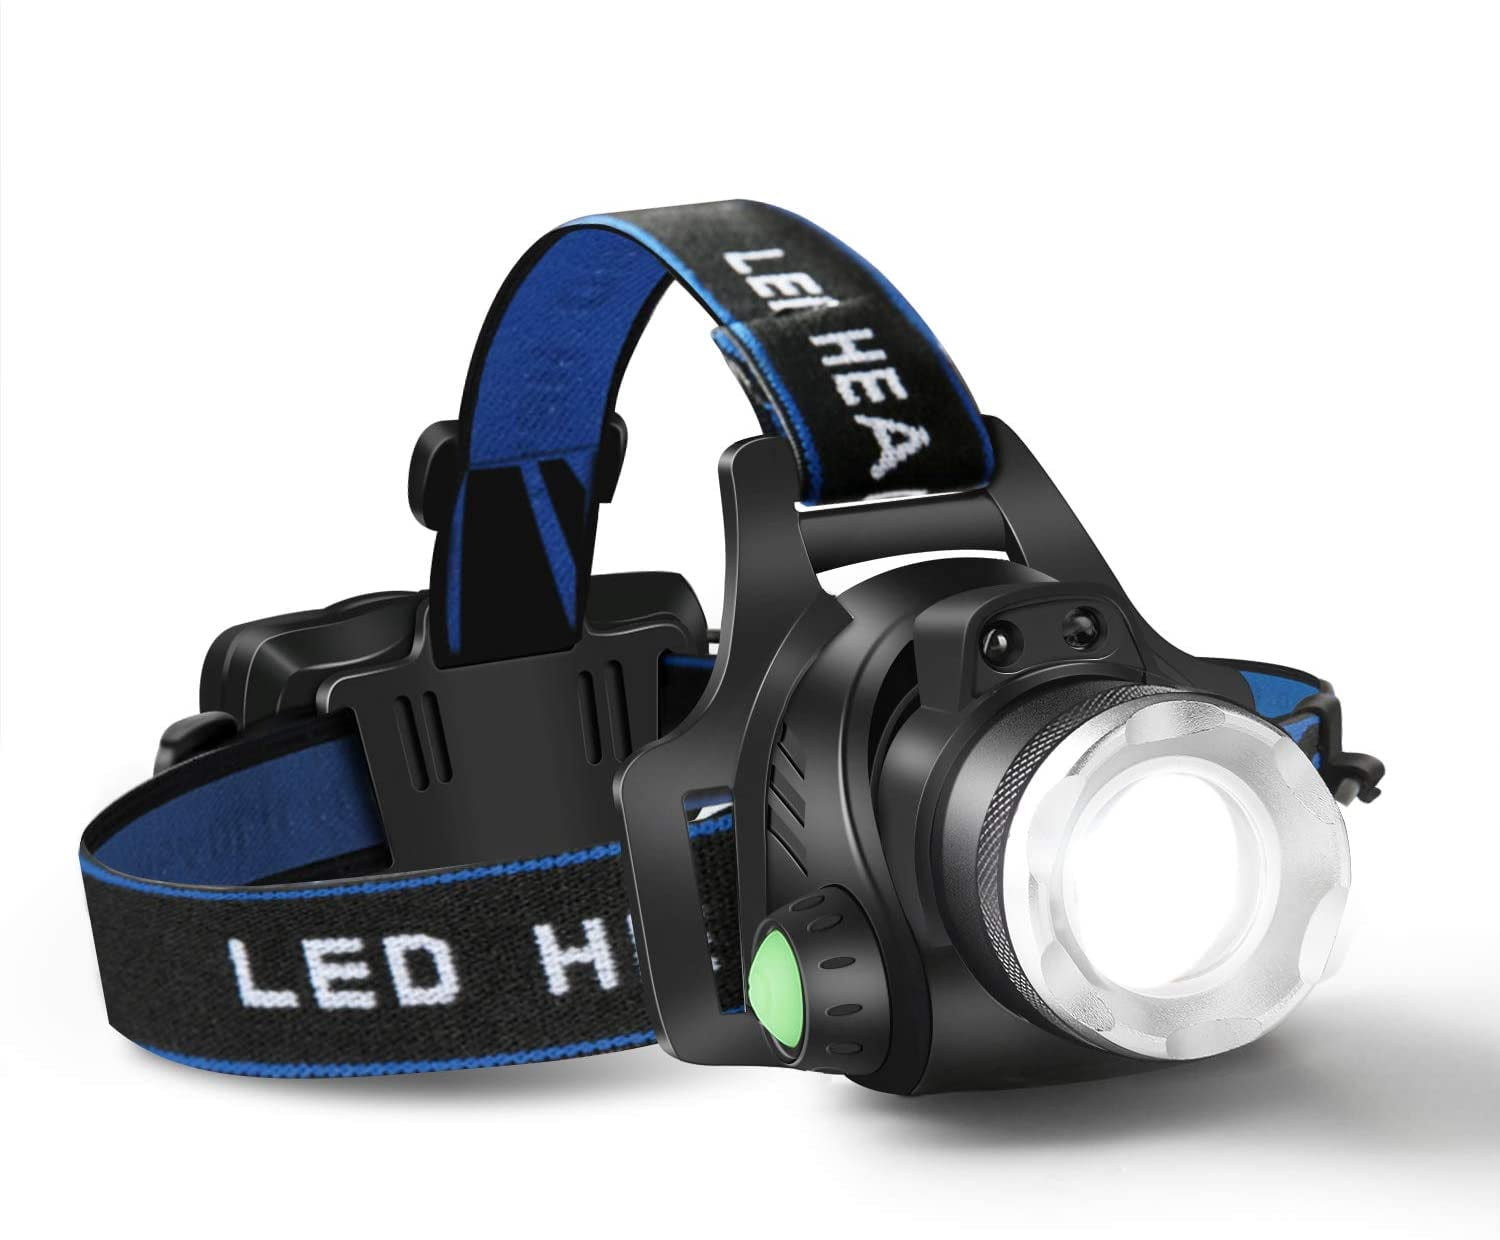 Hiking Battery included LED Head Torch USB Rechargeable Headlamp 1000Lumen Waterproof Zoomable Induction Headlight with 3 mode for Running,Fishing,Camping Cycling